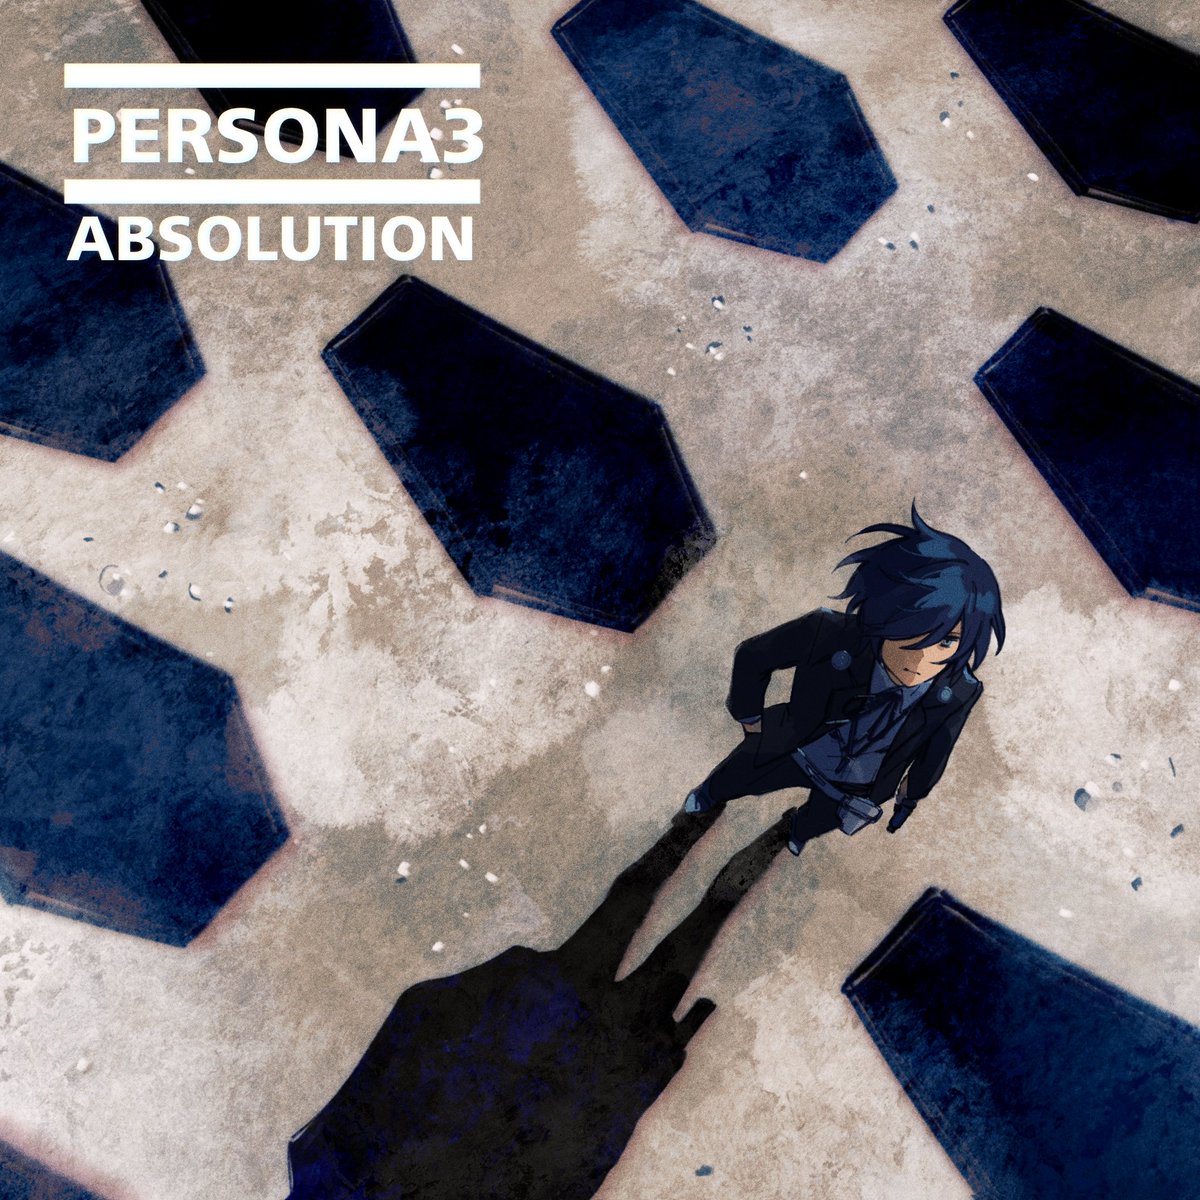 Absolution
#persona3